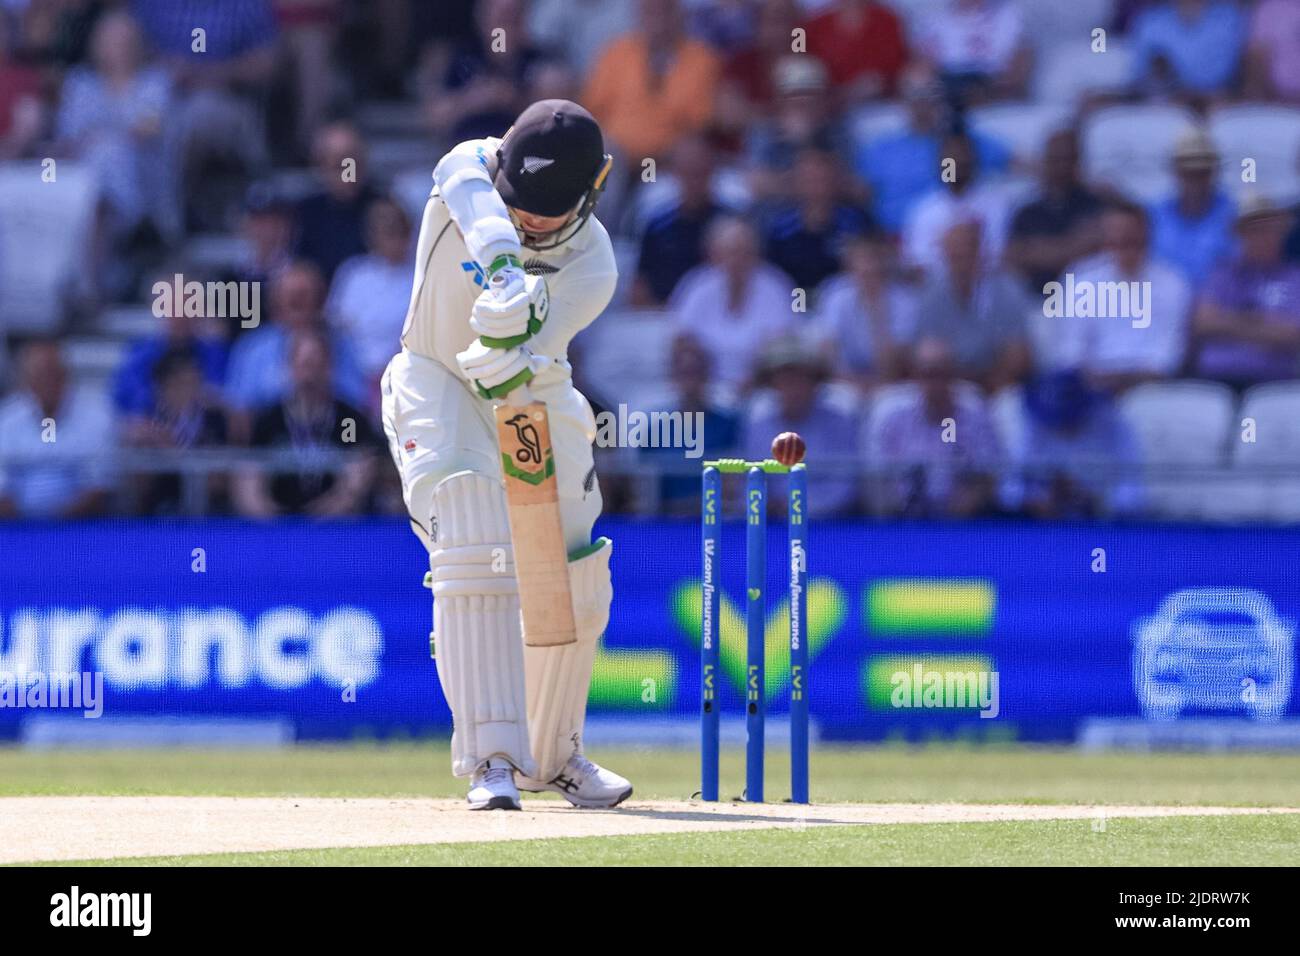 Leeds, UK. 23rd June, 2022. Tom Latham of New Zealand clips the ball and is caught by Joe Root of England in Leeds, United Kingdom on 6/23/2022. (Photo by Mark Cosgrove/News Images/Sipa USA) Credit: Sipa USA/Alamy Live News Stock Photo